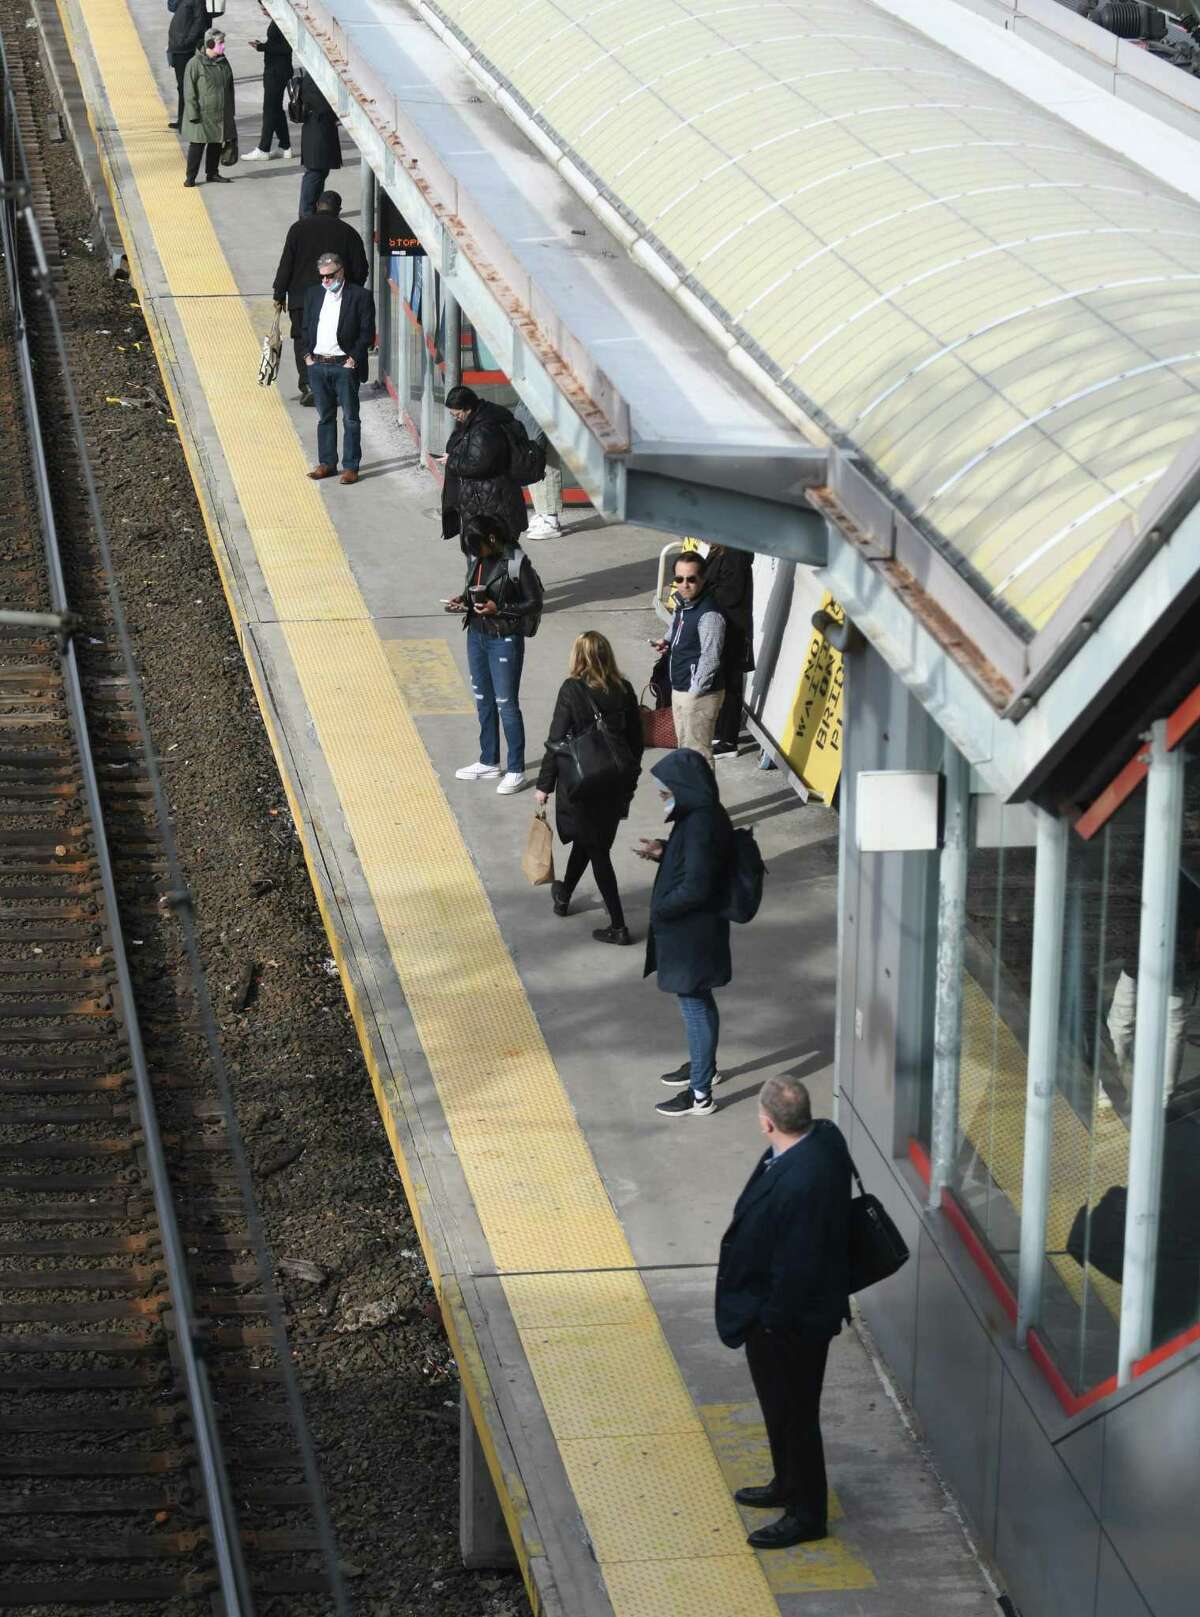 Commuters wait on the train platform during the morning rush hour at the Stamford Transportation Center in Stamford, Conn. Wednesday, March 23, 2022.